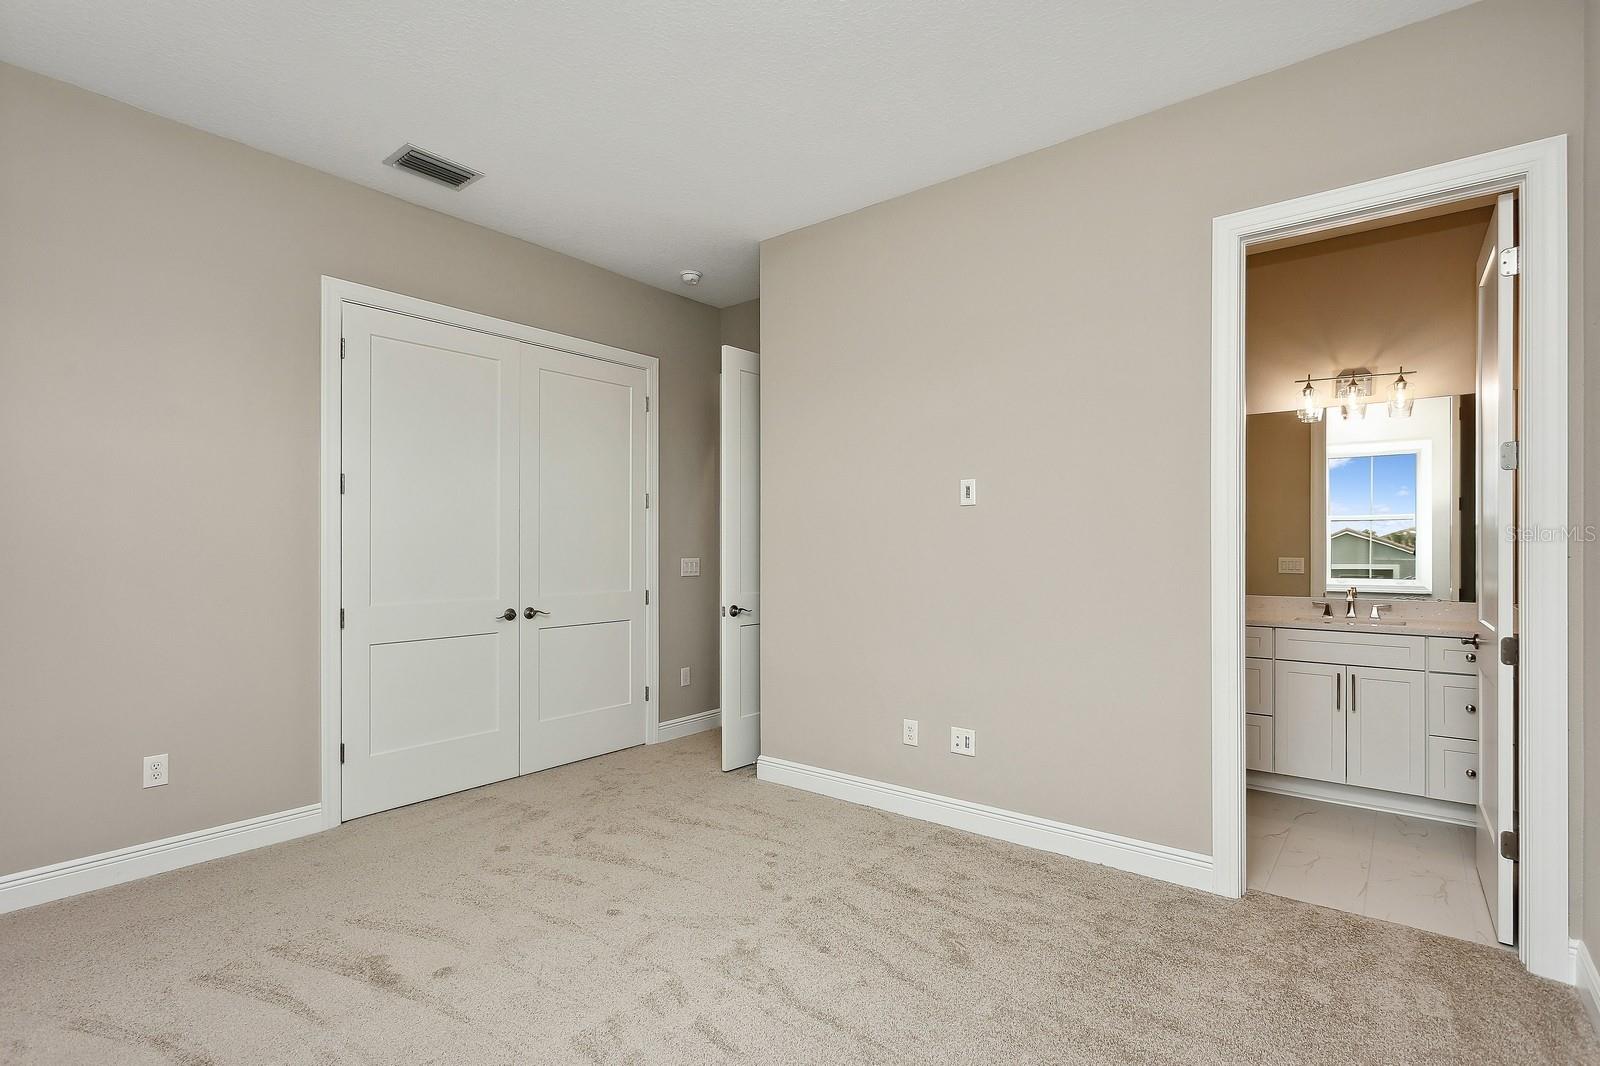 Ceilings: 14’ in family rm, 12’ in loft & rear lanai,  all other ceilings are 10’ in height.